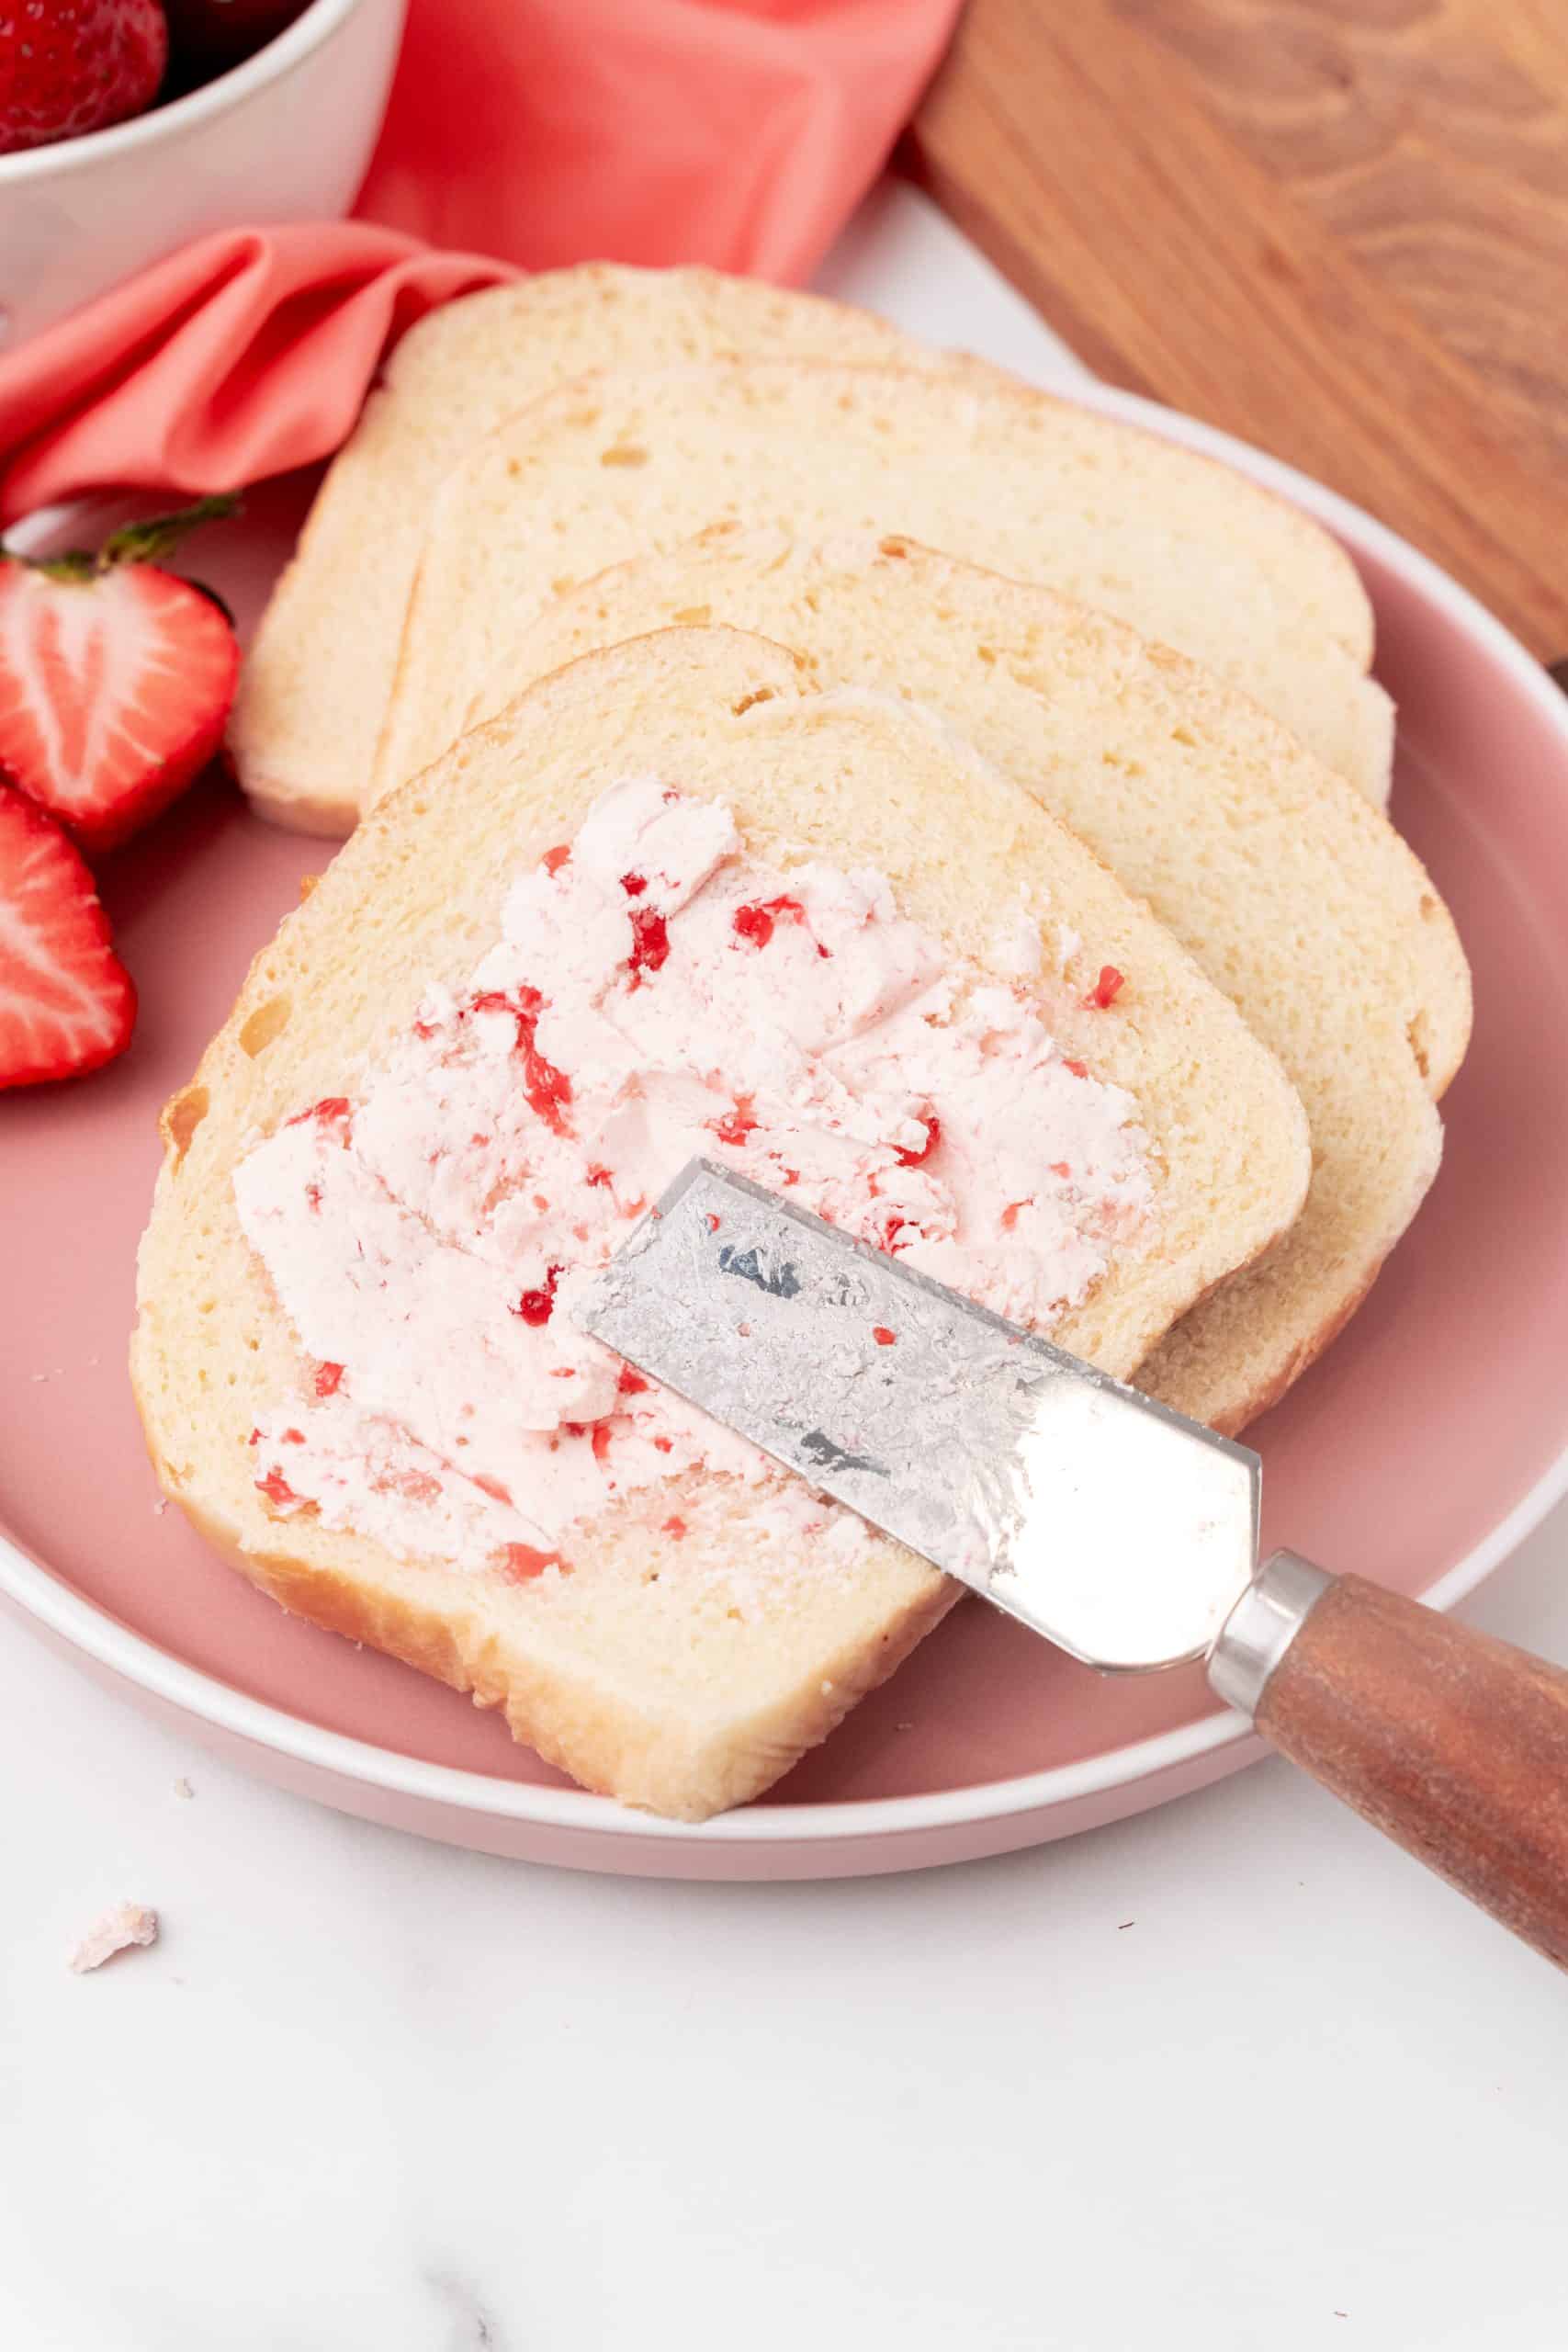 a metal spreader spreading whipped strawberry butter onto a slice of white bread